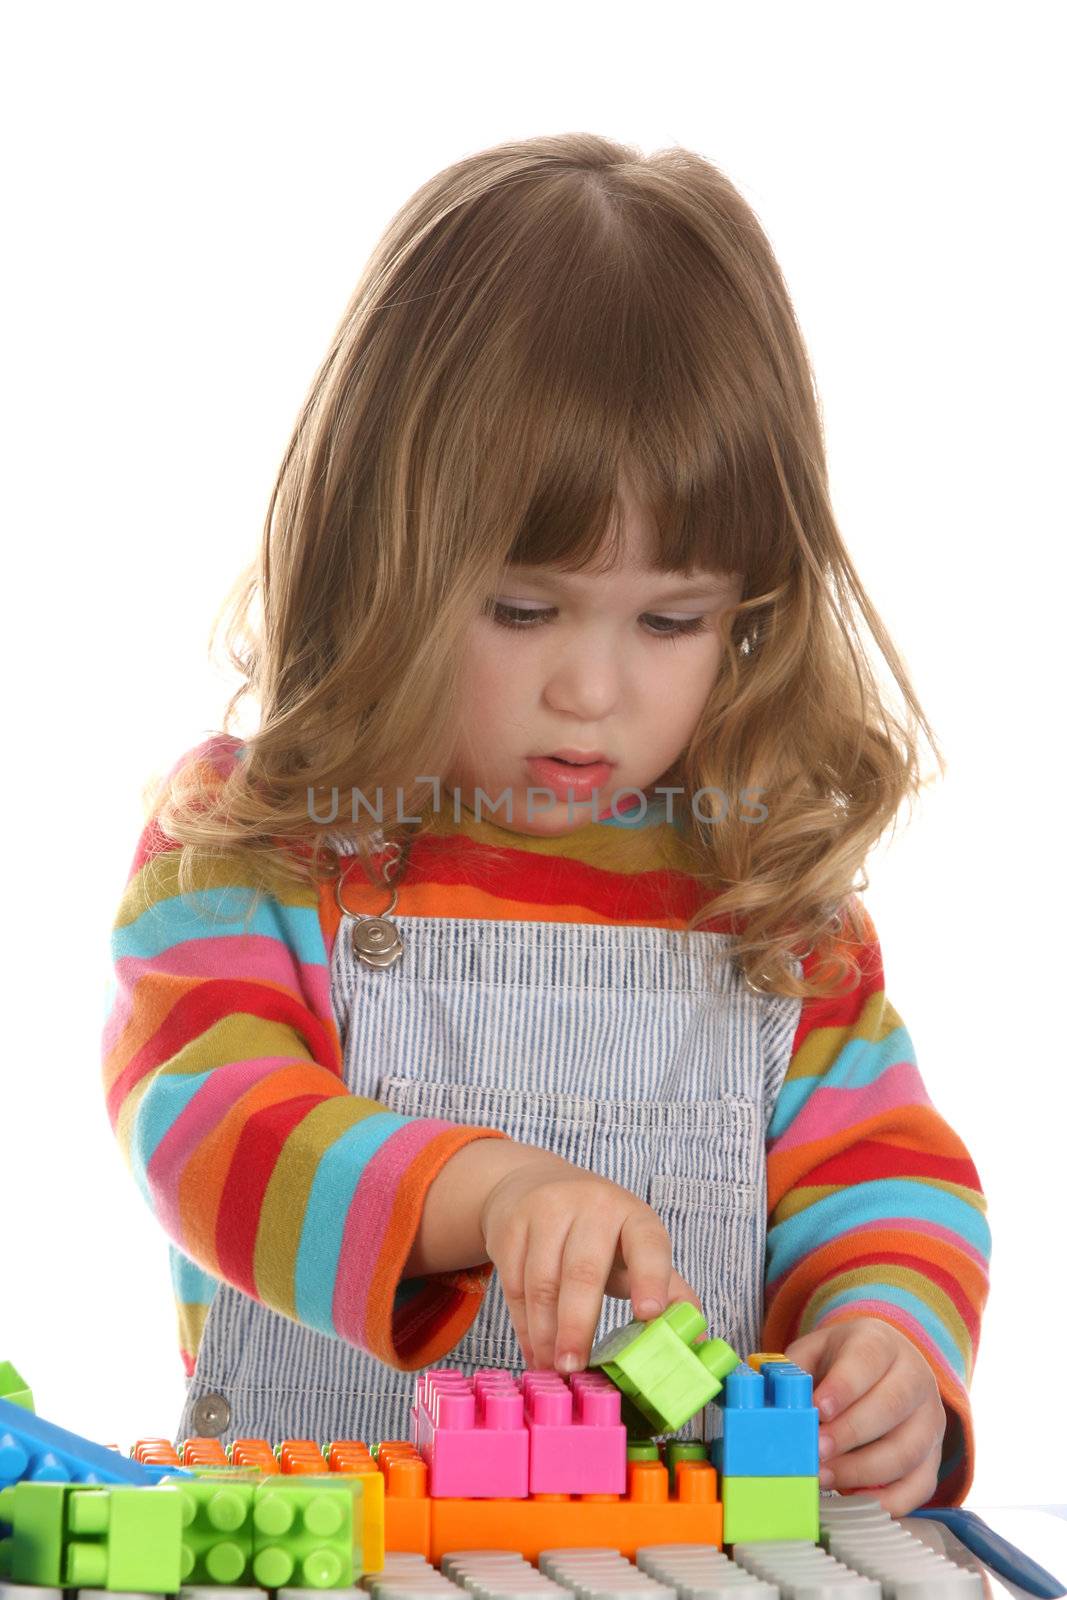 beauty a little girl playing colorful building toy blocks 